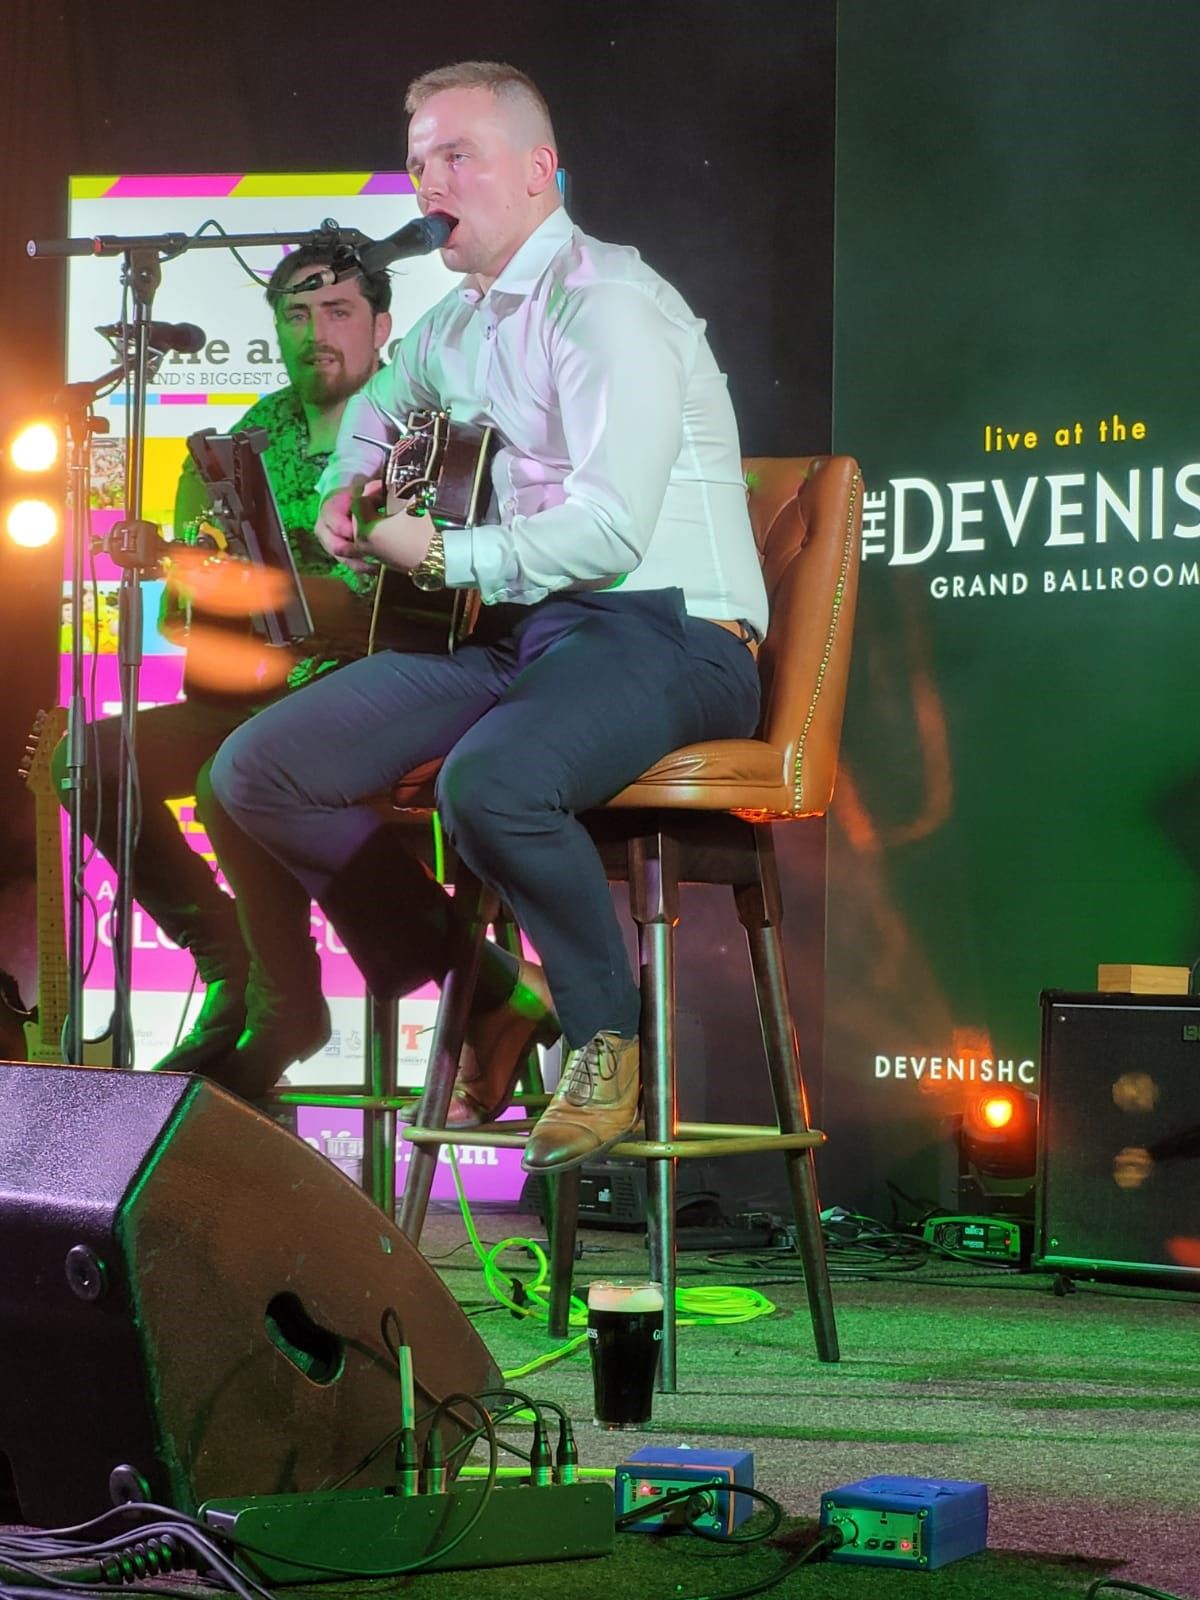 MUSIC: Wednesday is promising to be full of music, including a performance by Dan McCabe at the Devenish at 7pm